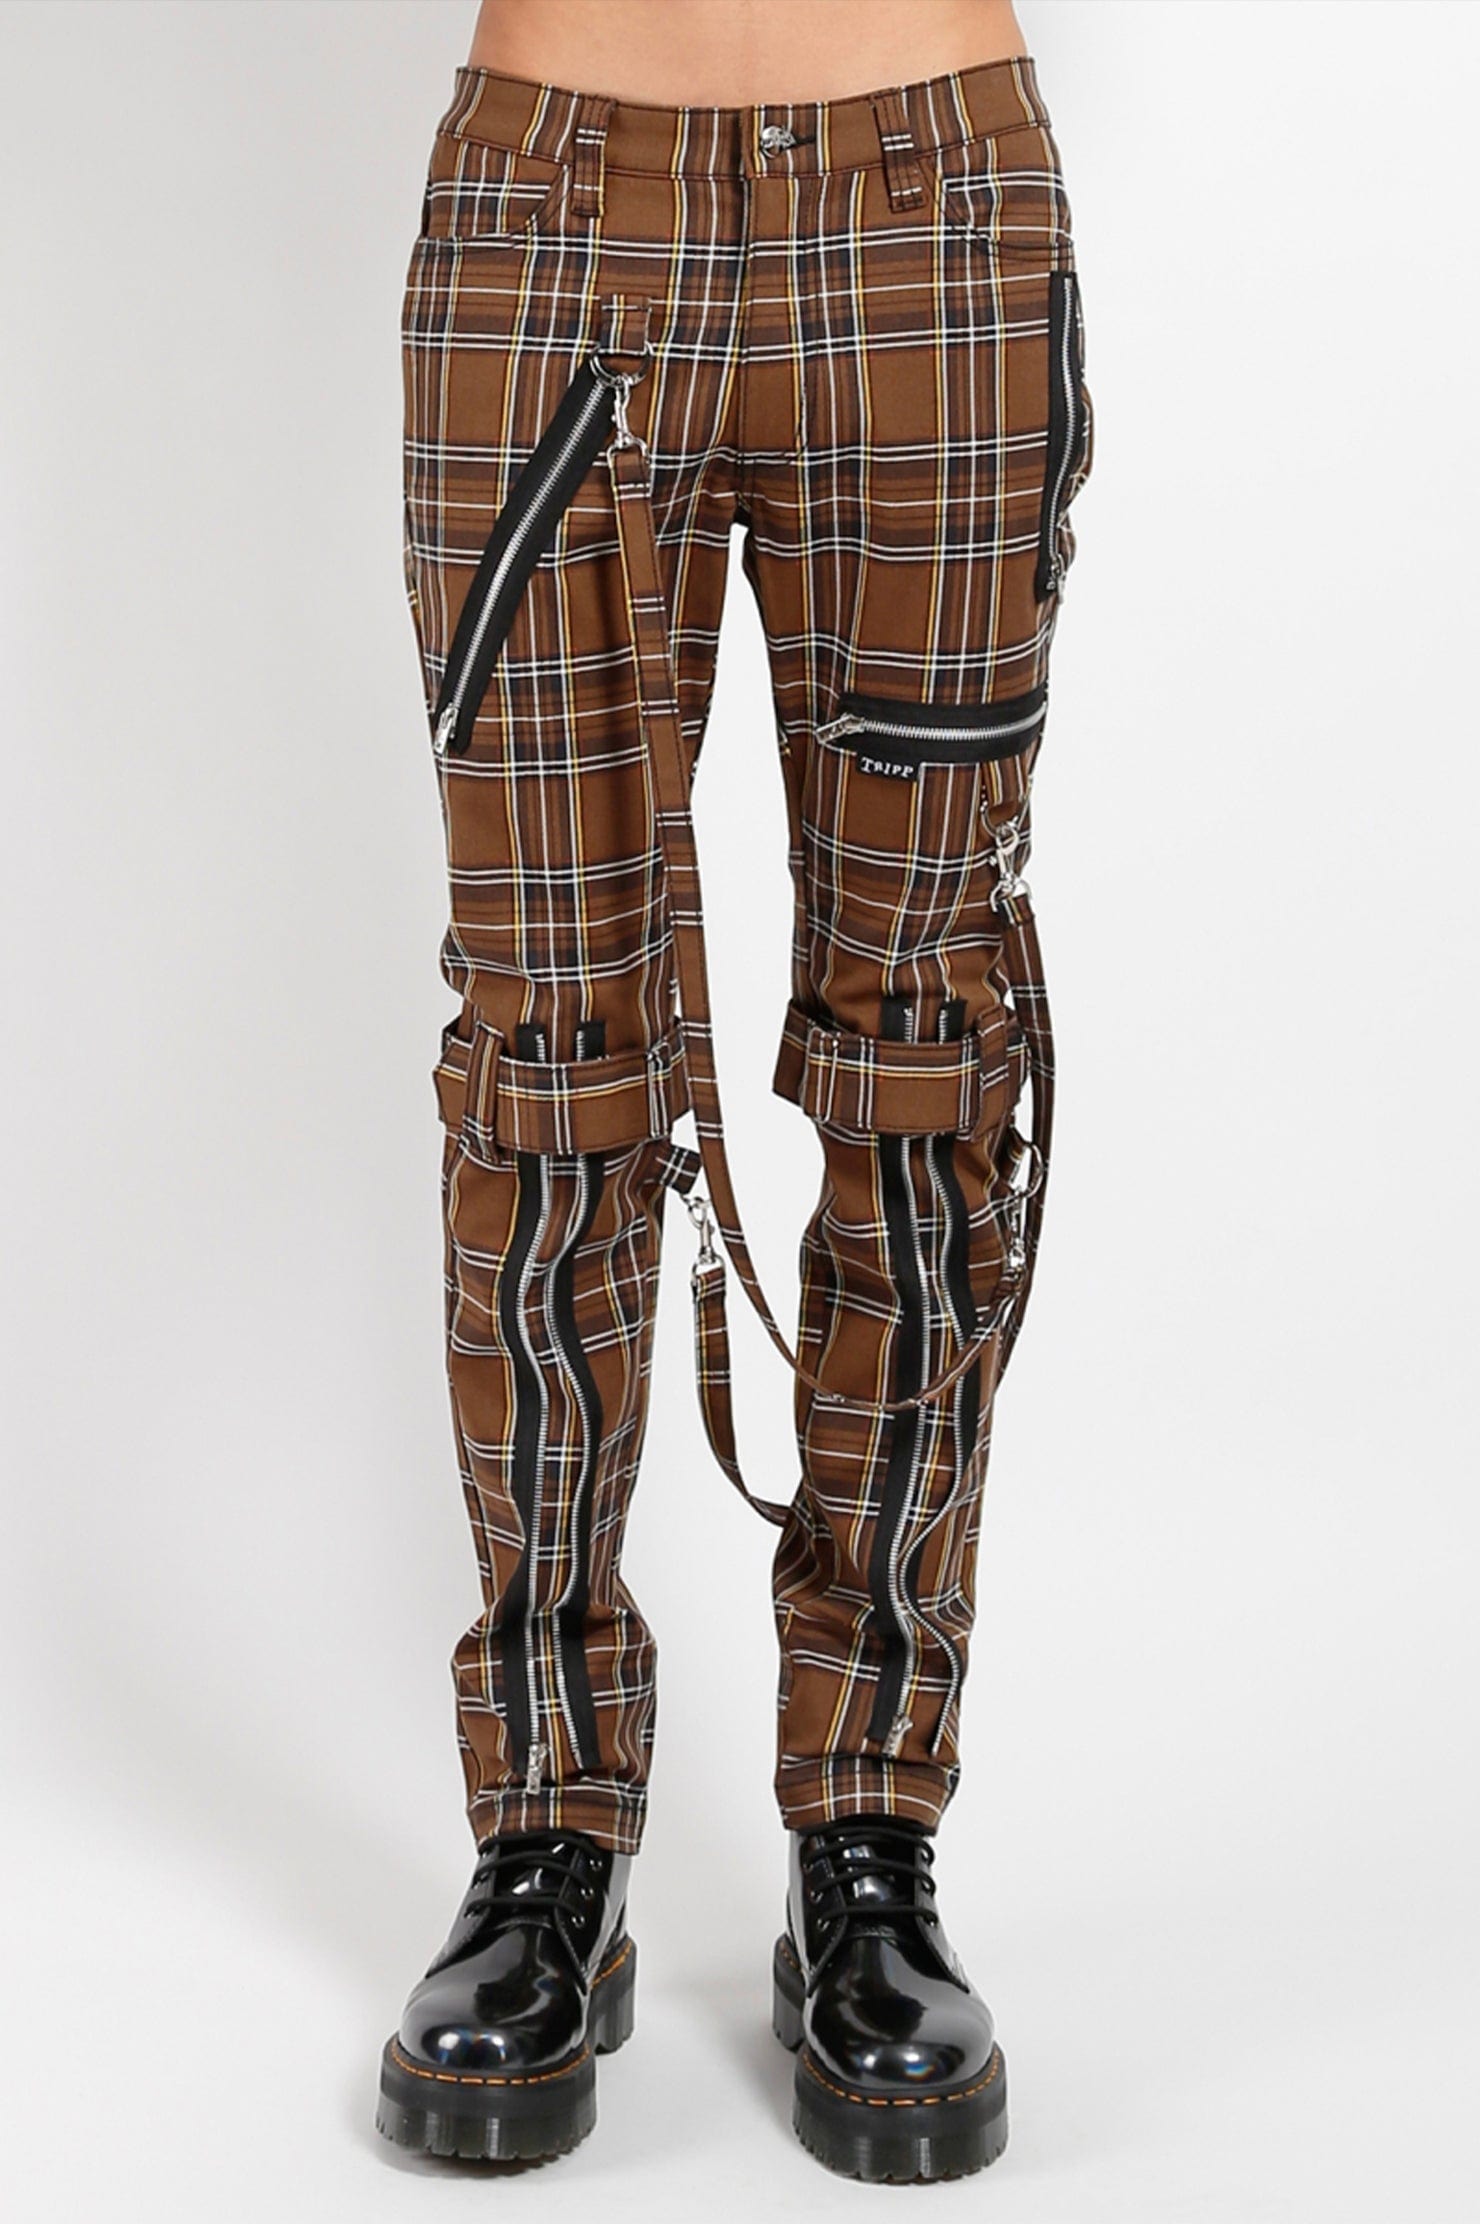 TRIPP N.Y.C. The Harness Pants – Posers Hollywood